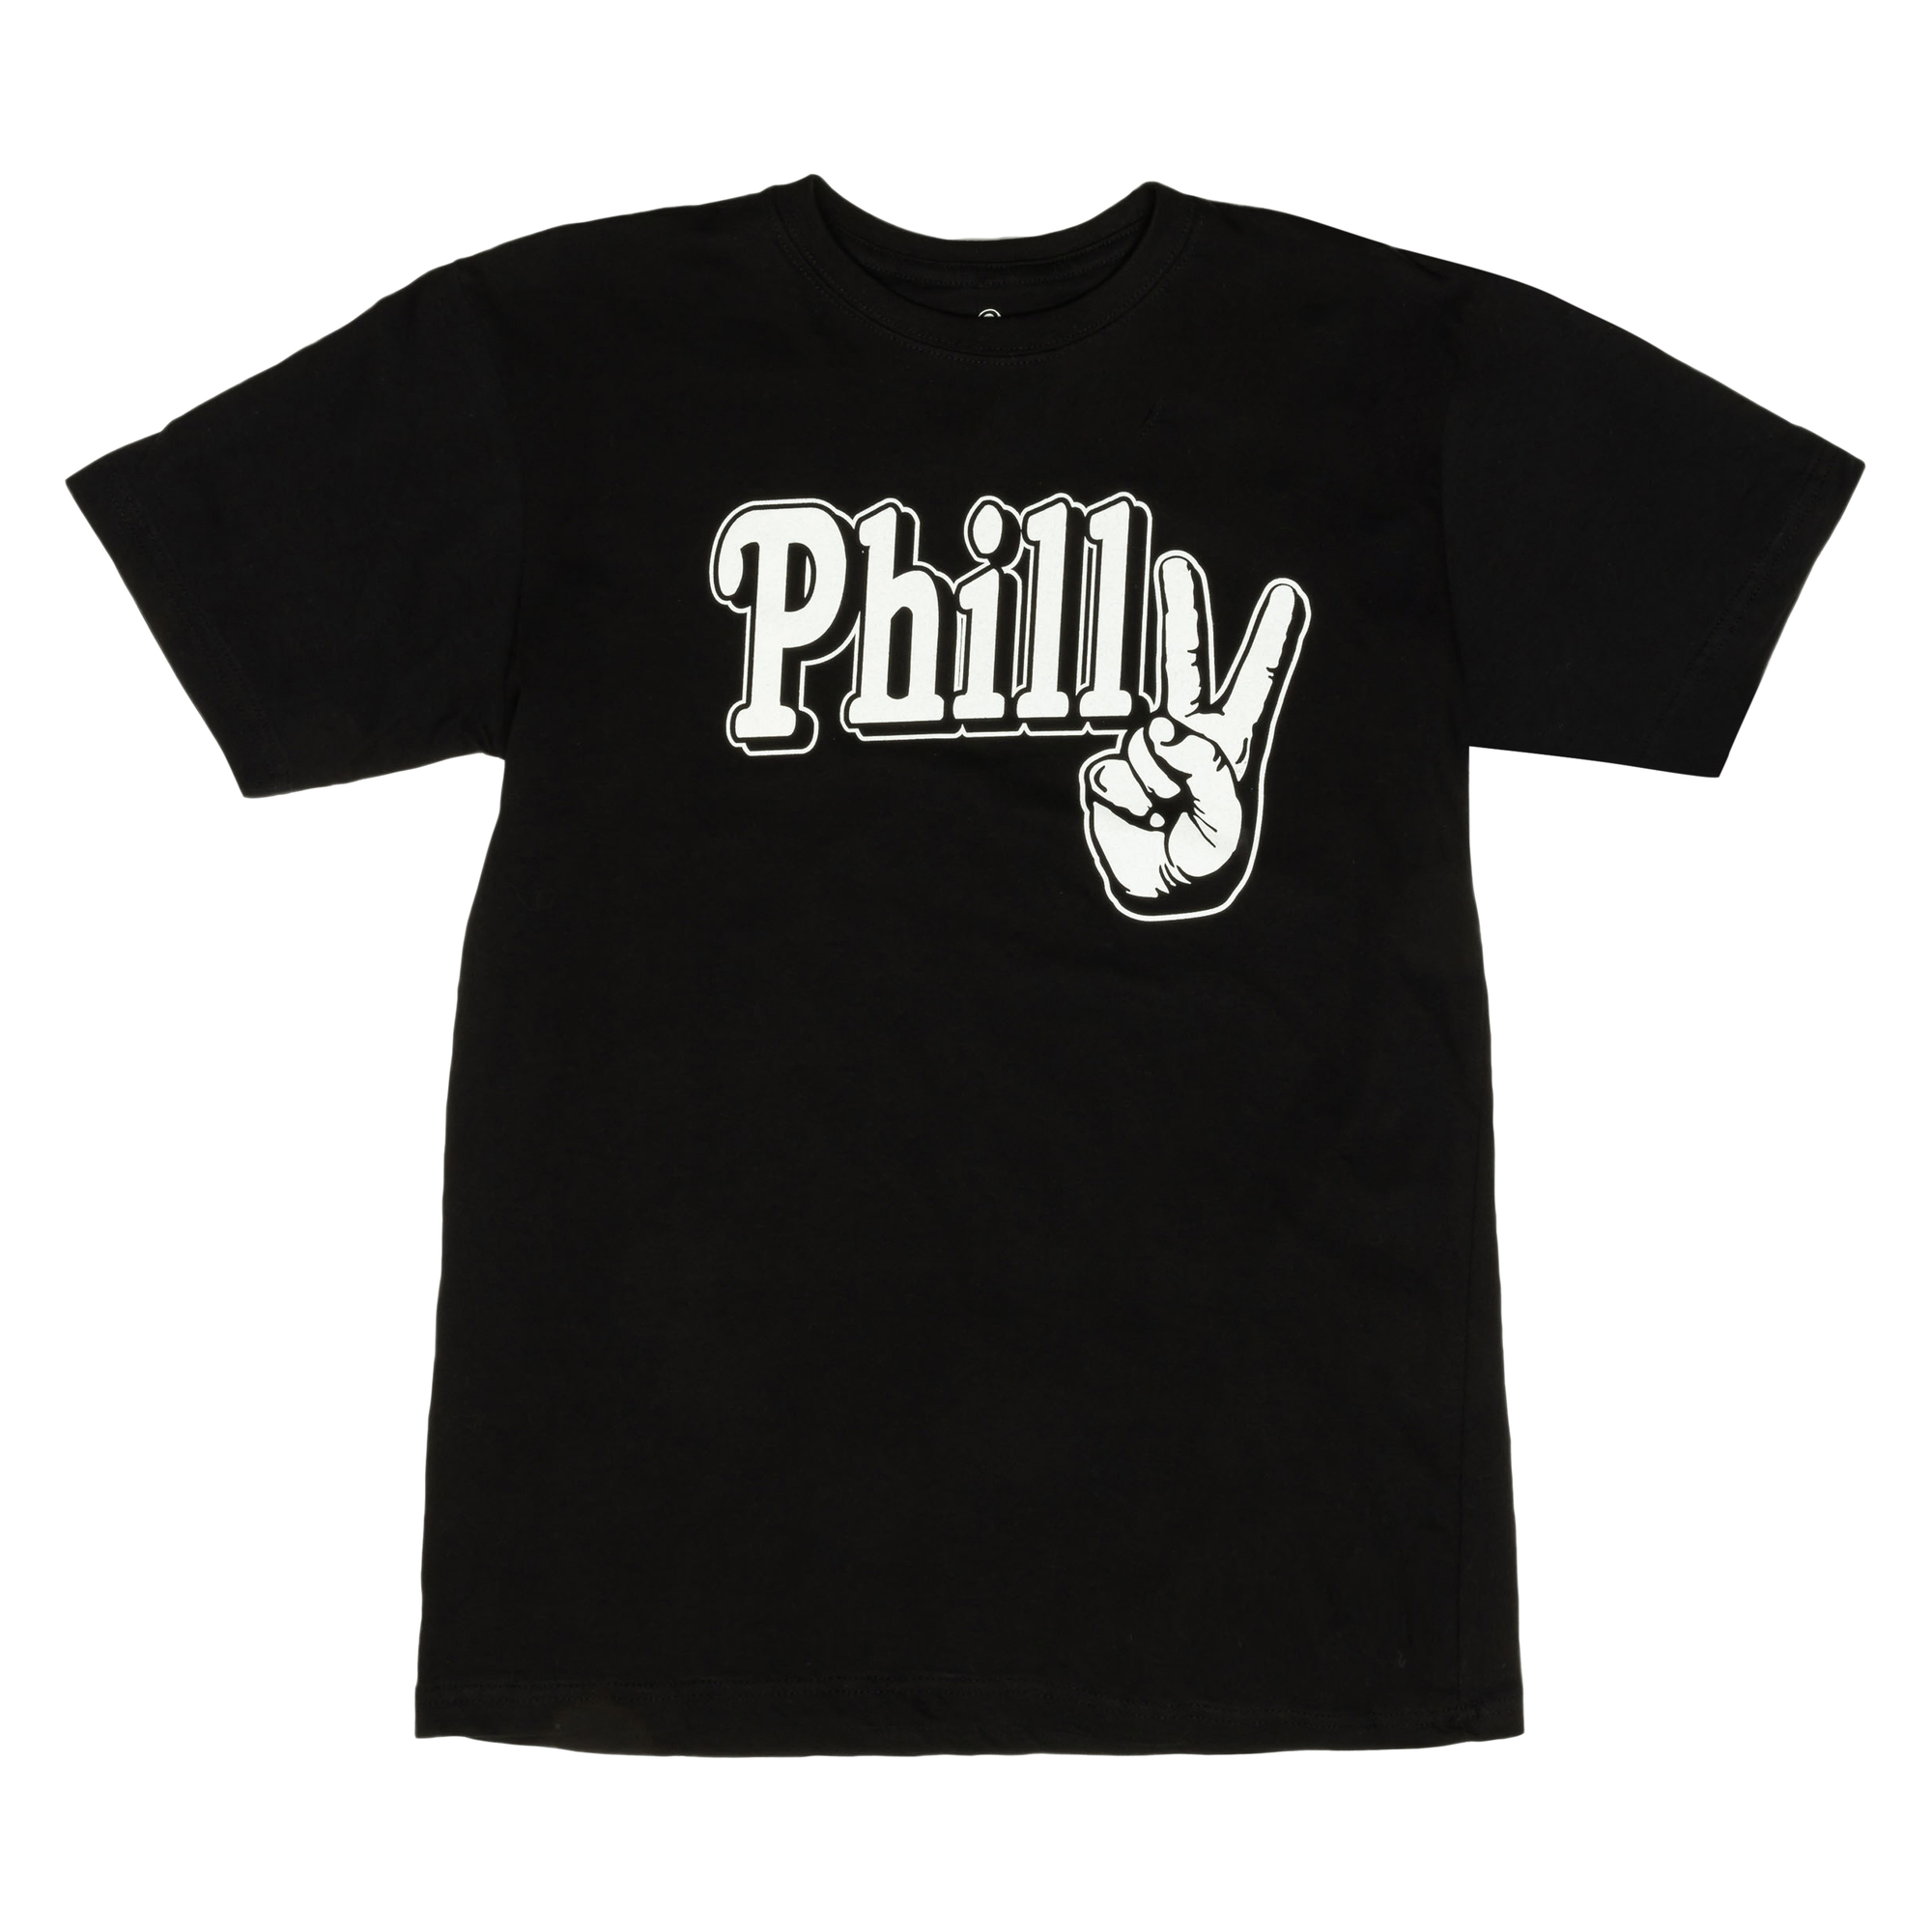 philly peace sign graphic tee